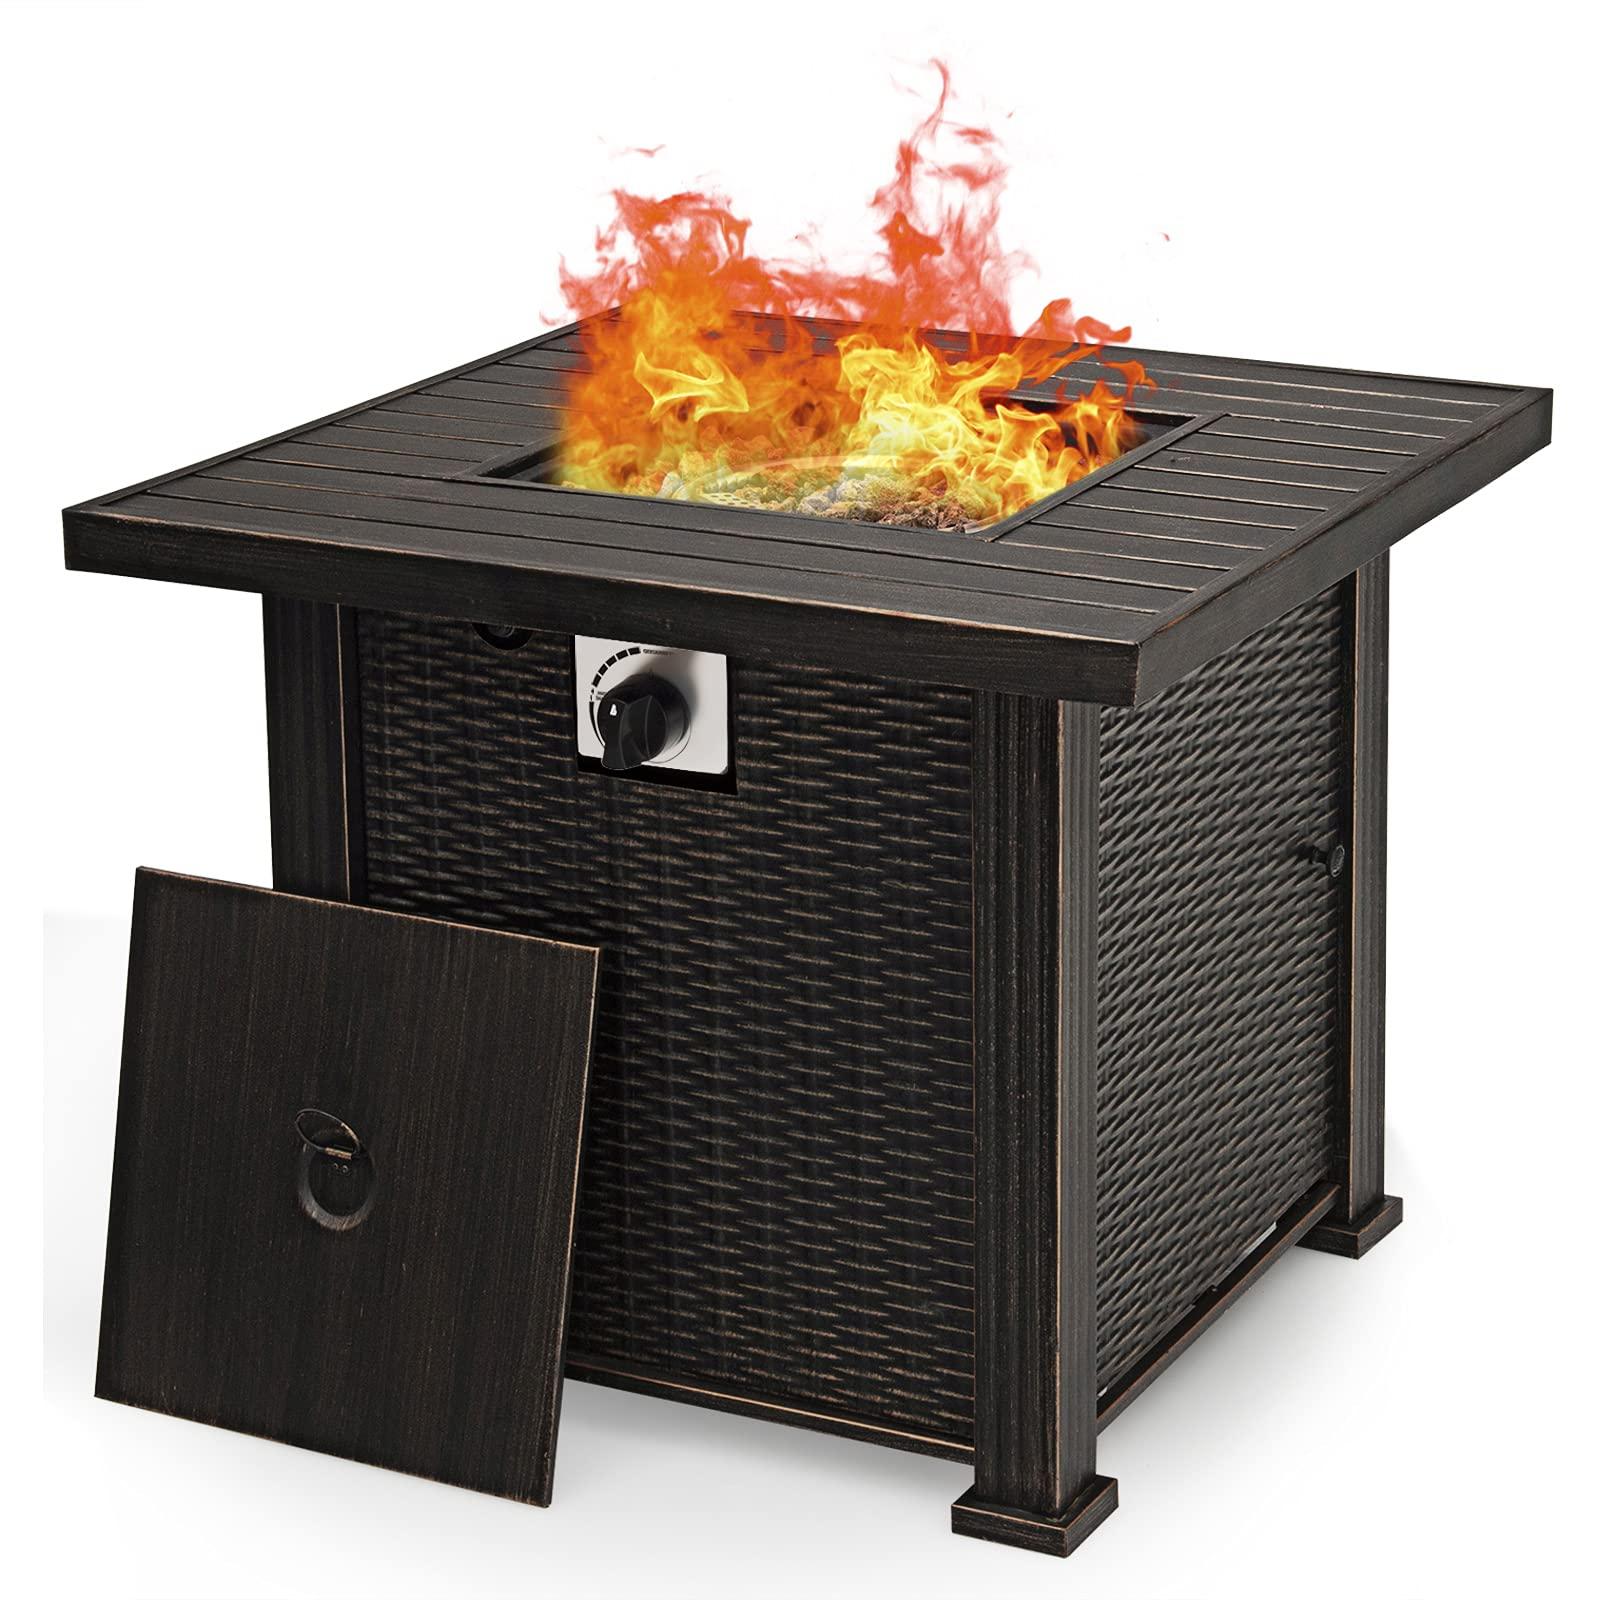 Giantex Gas Fire Pit Table, 30 Inch 50,000 BTU Auto-Ignition Propane Fire Pit (Brown)